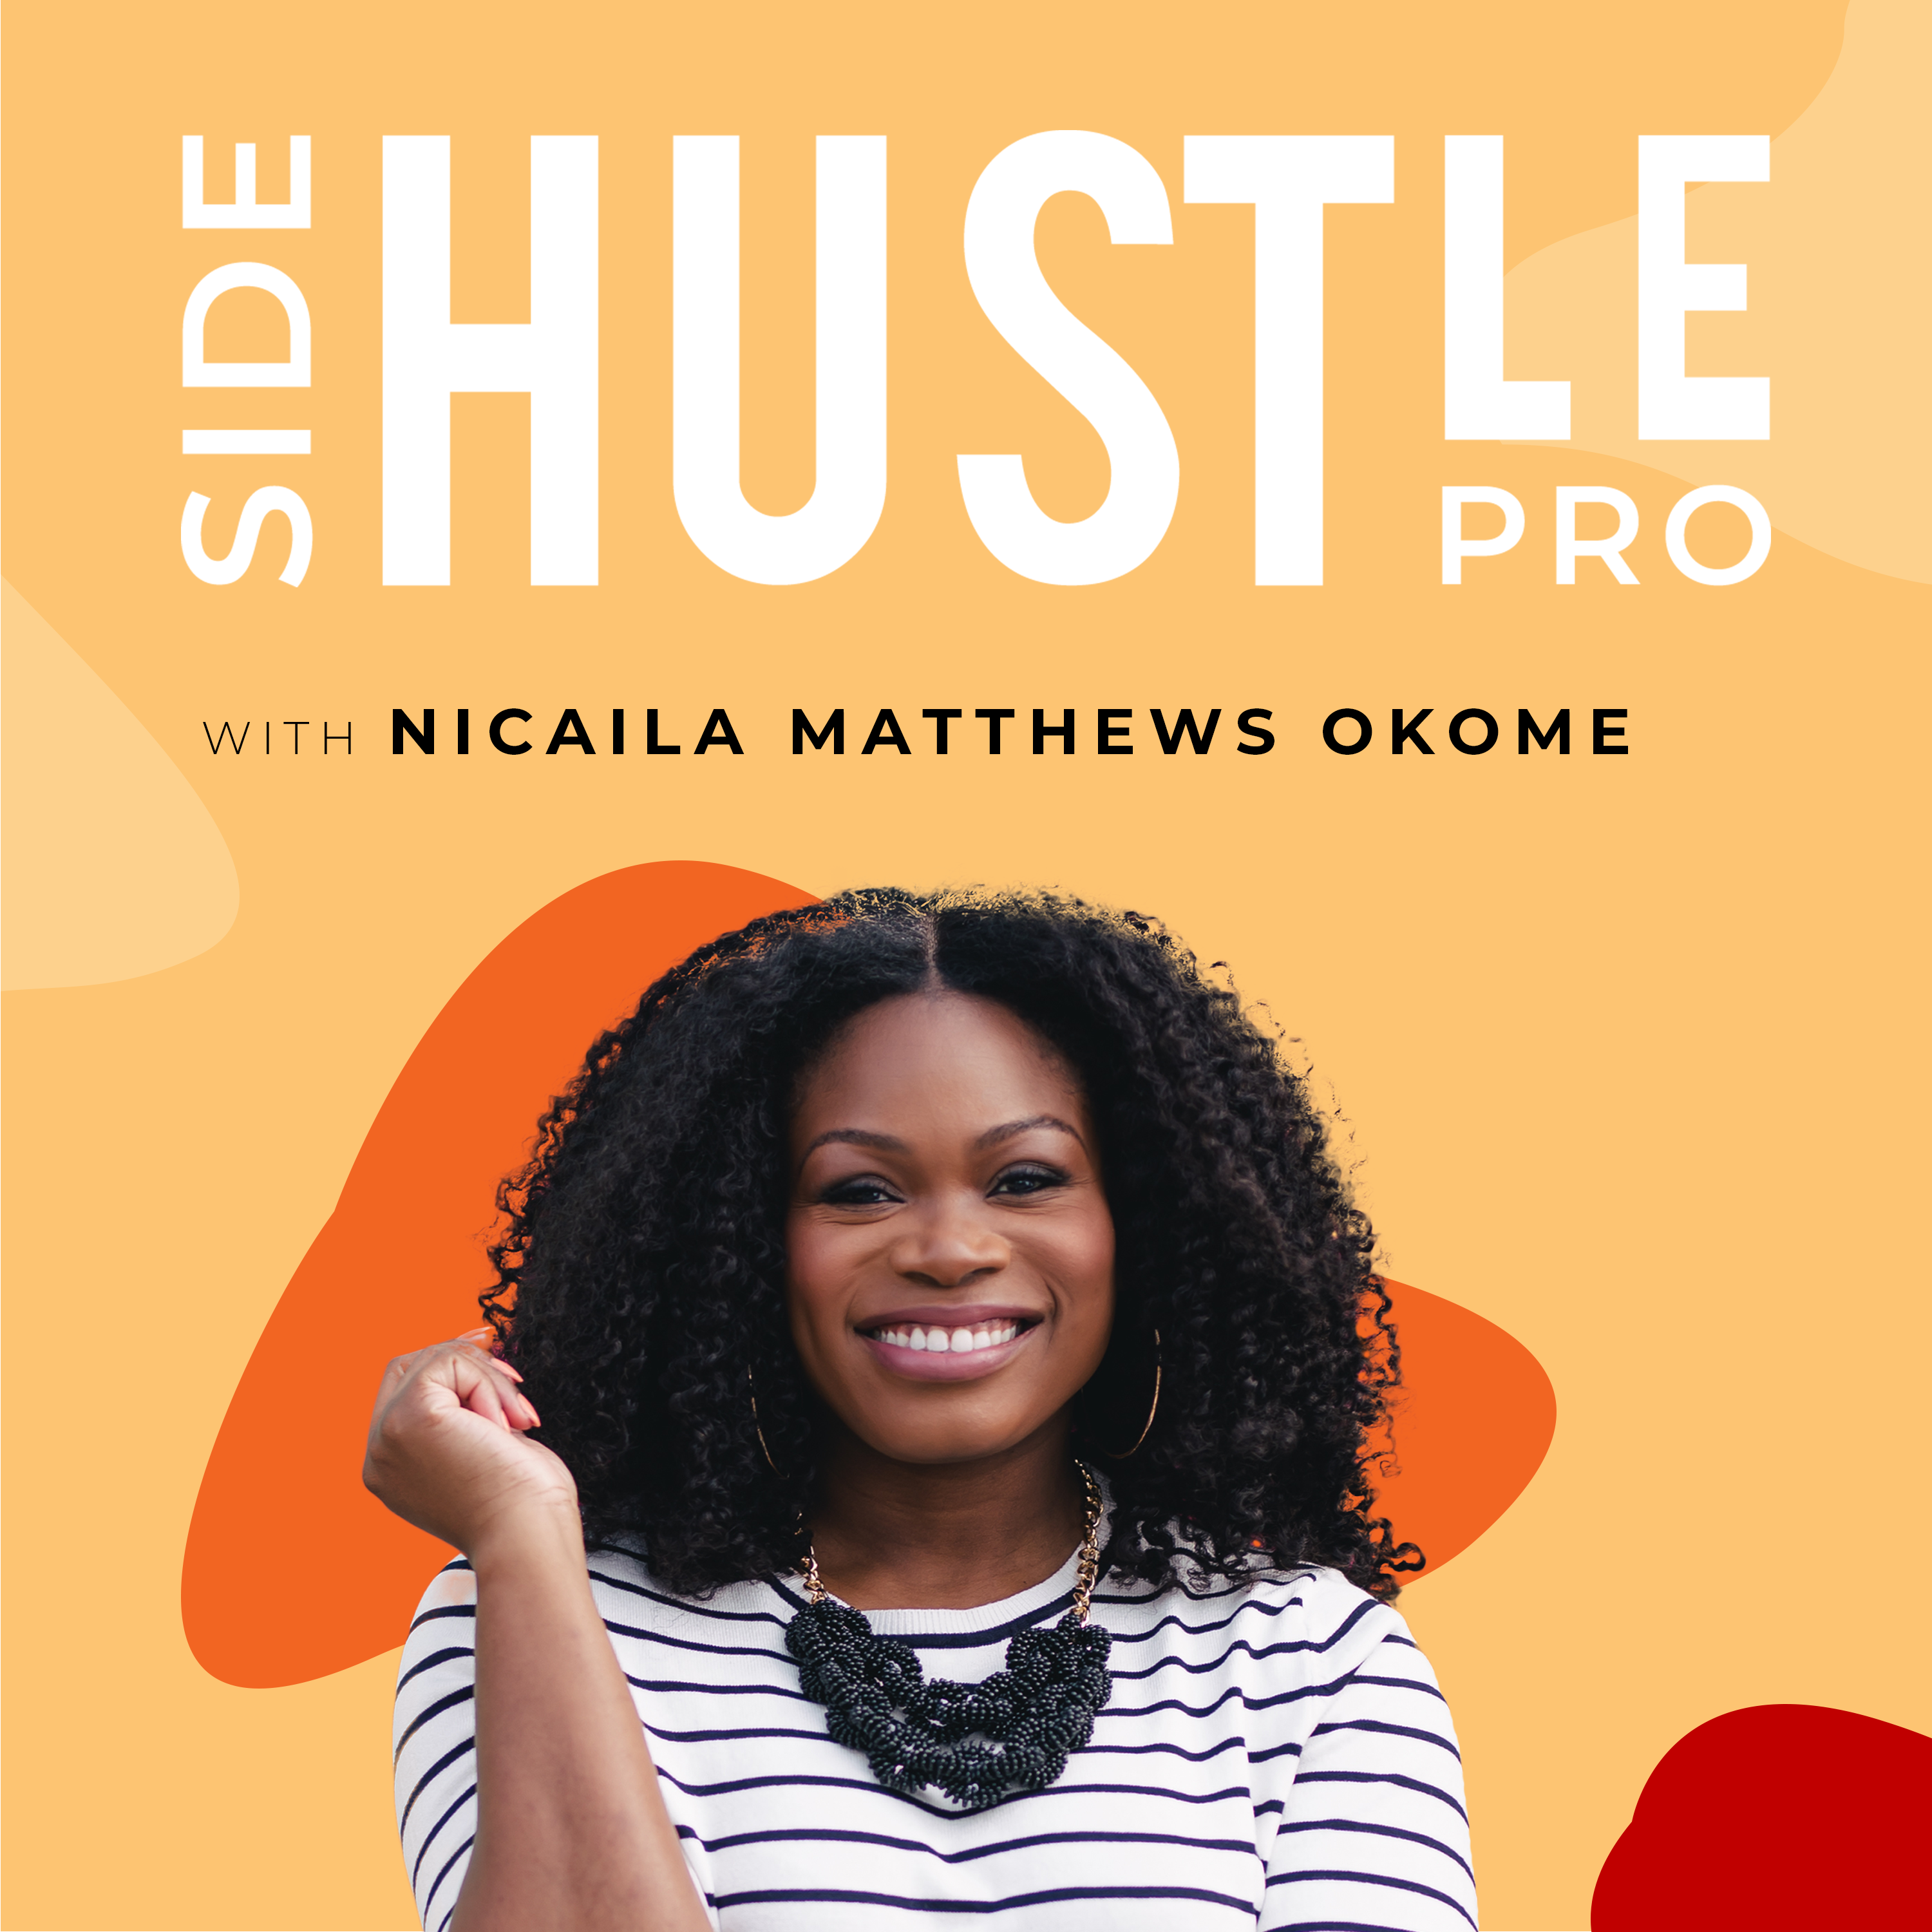 222: HUSTLE BOMB: Letter to my younger self